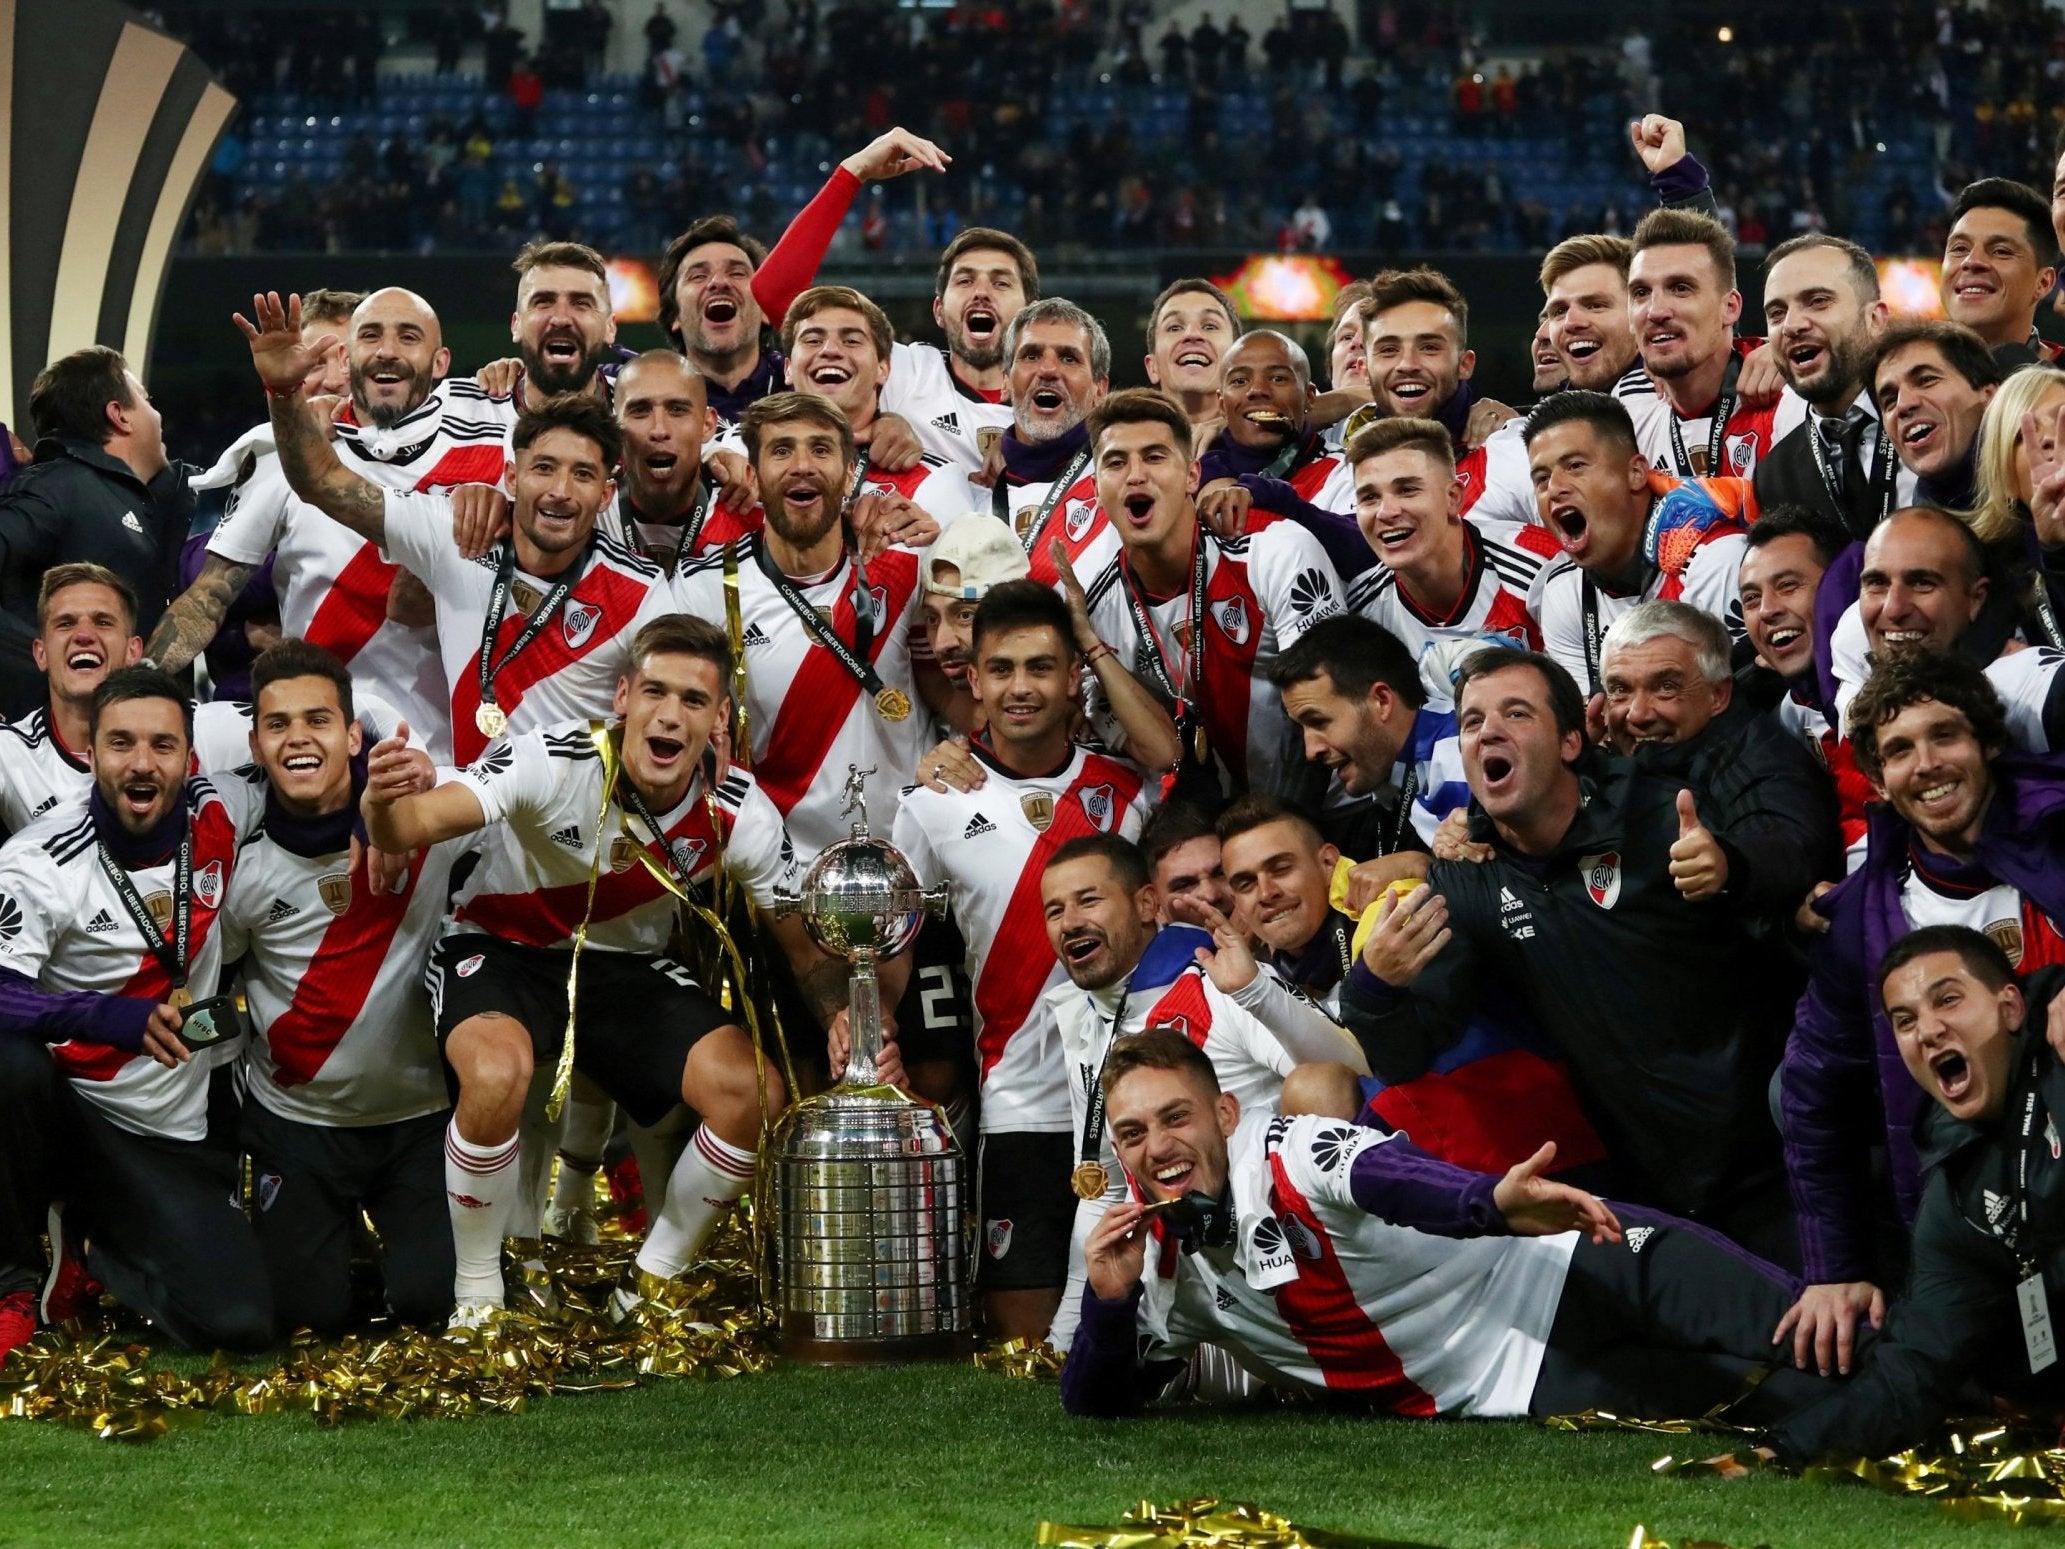 River Plater were crowned the champions of South America with victory over Boca Juniors